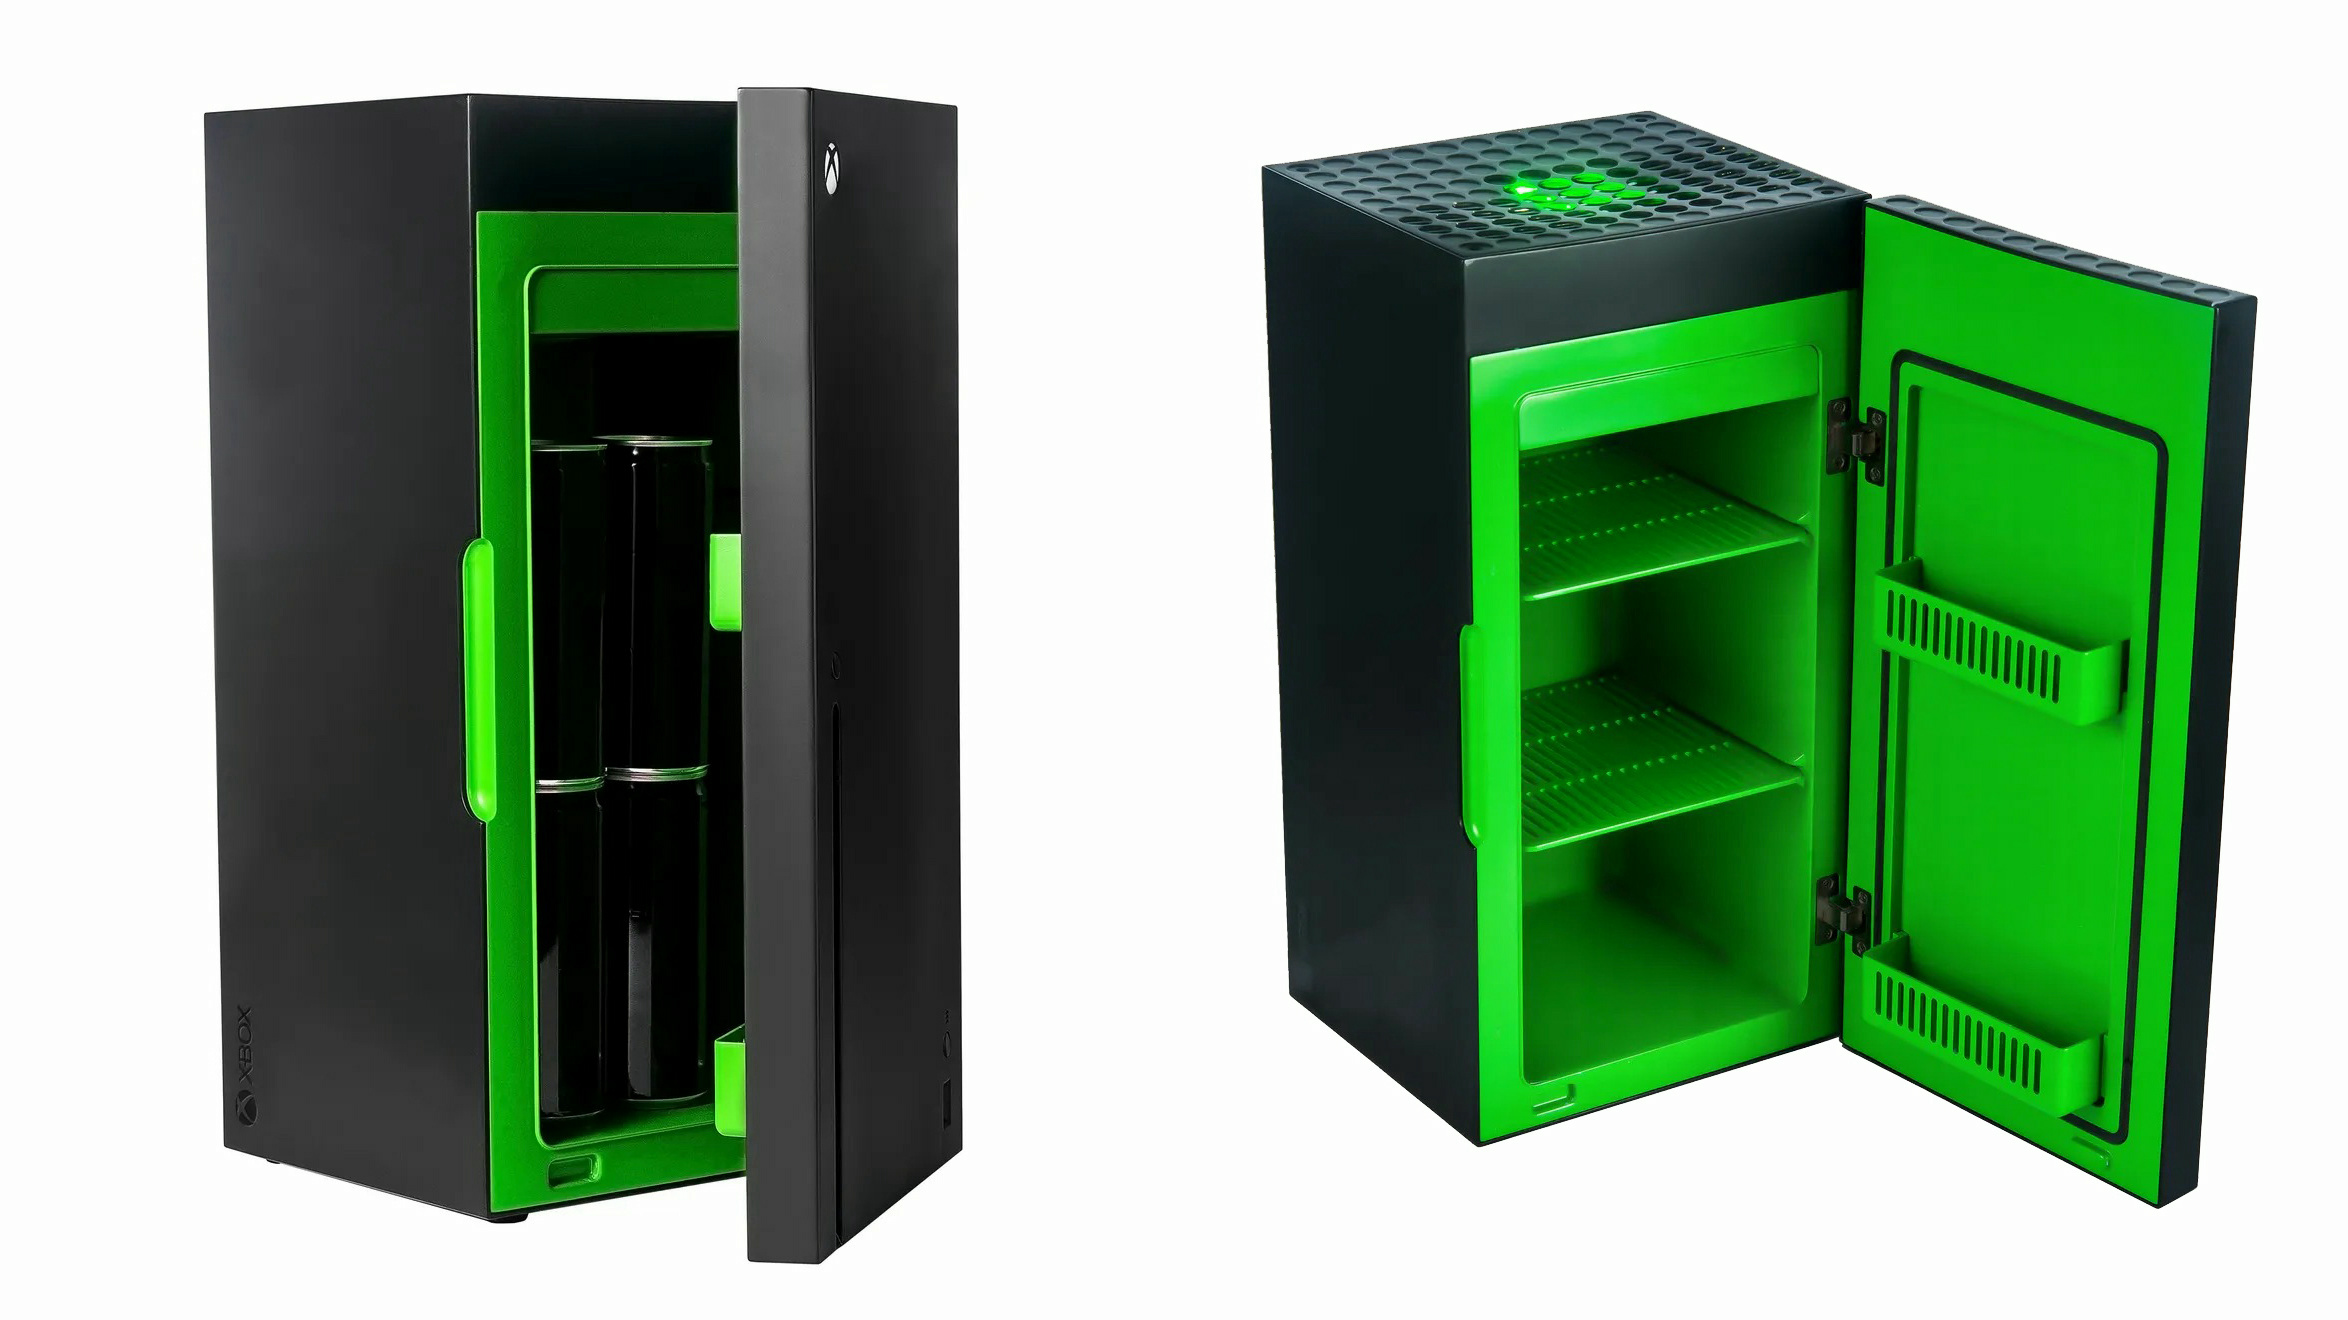 Reservation for Xbox Series X-type refrigerator started, price is 